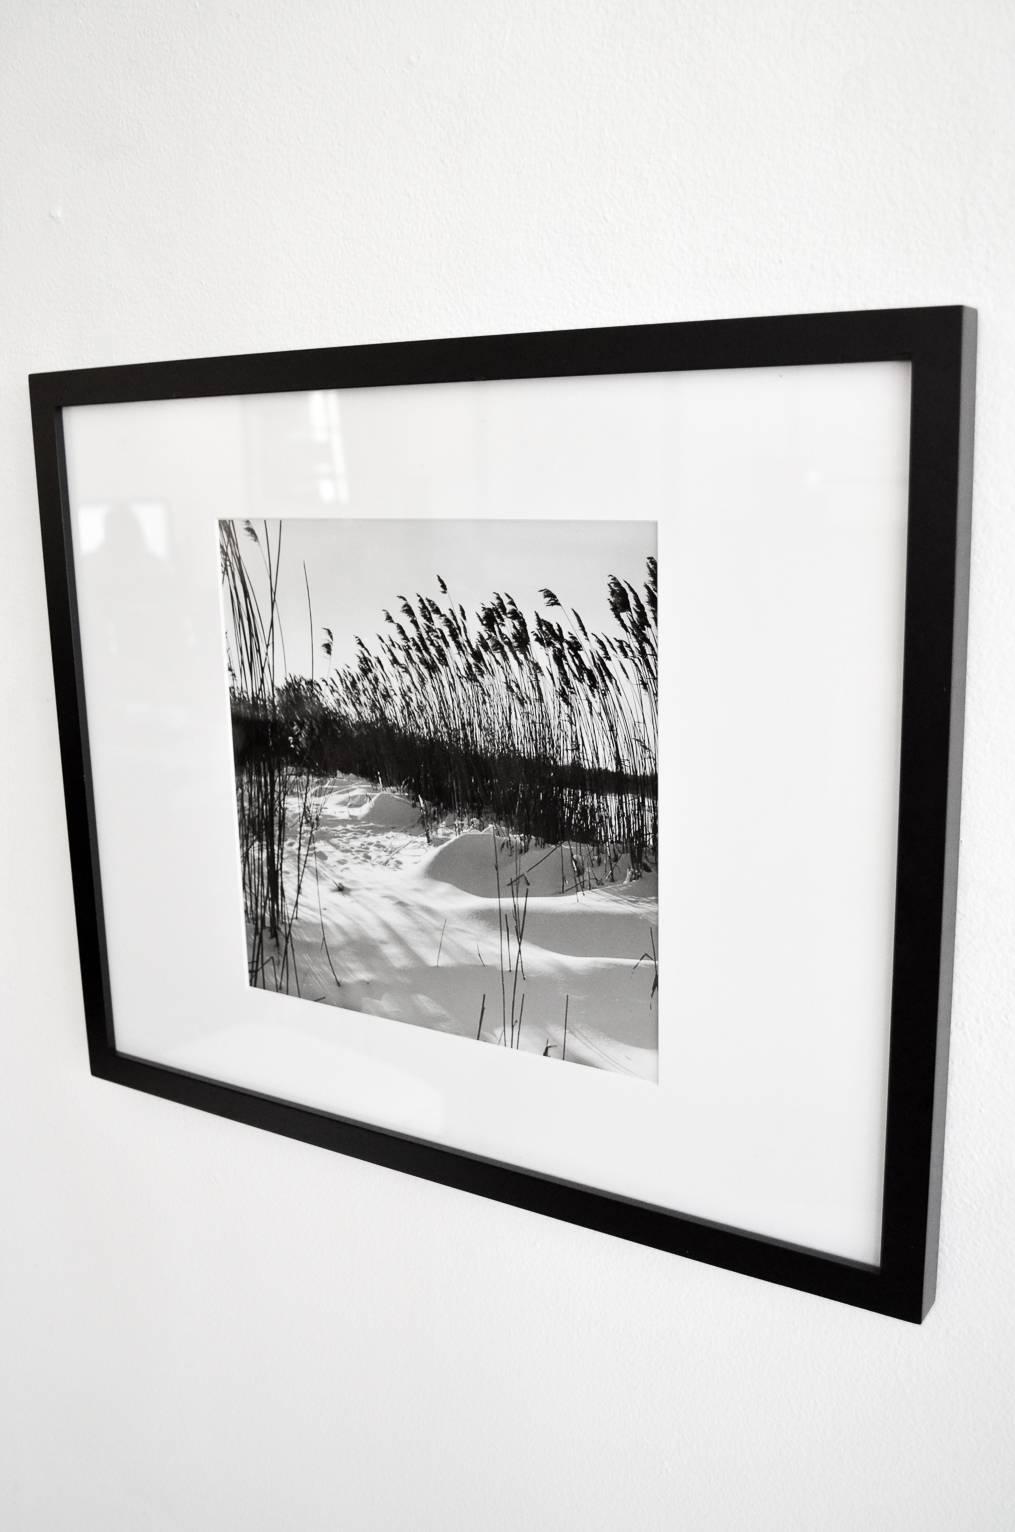 Original black and white photograph and artist developed print of Montauk by photographer Jerry Muller. Image is from his personal archives.

Professionally matted and framed
Measures 21.25″ W x 17.25″ H x 1″ D

Photographer, editor, art